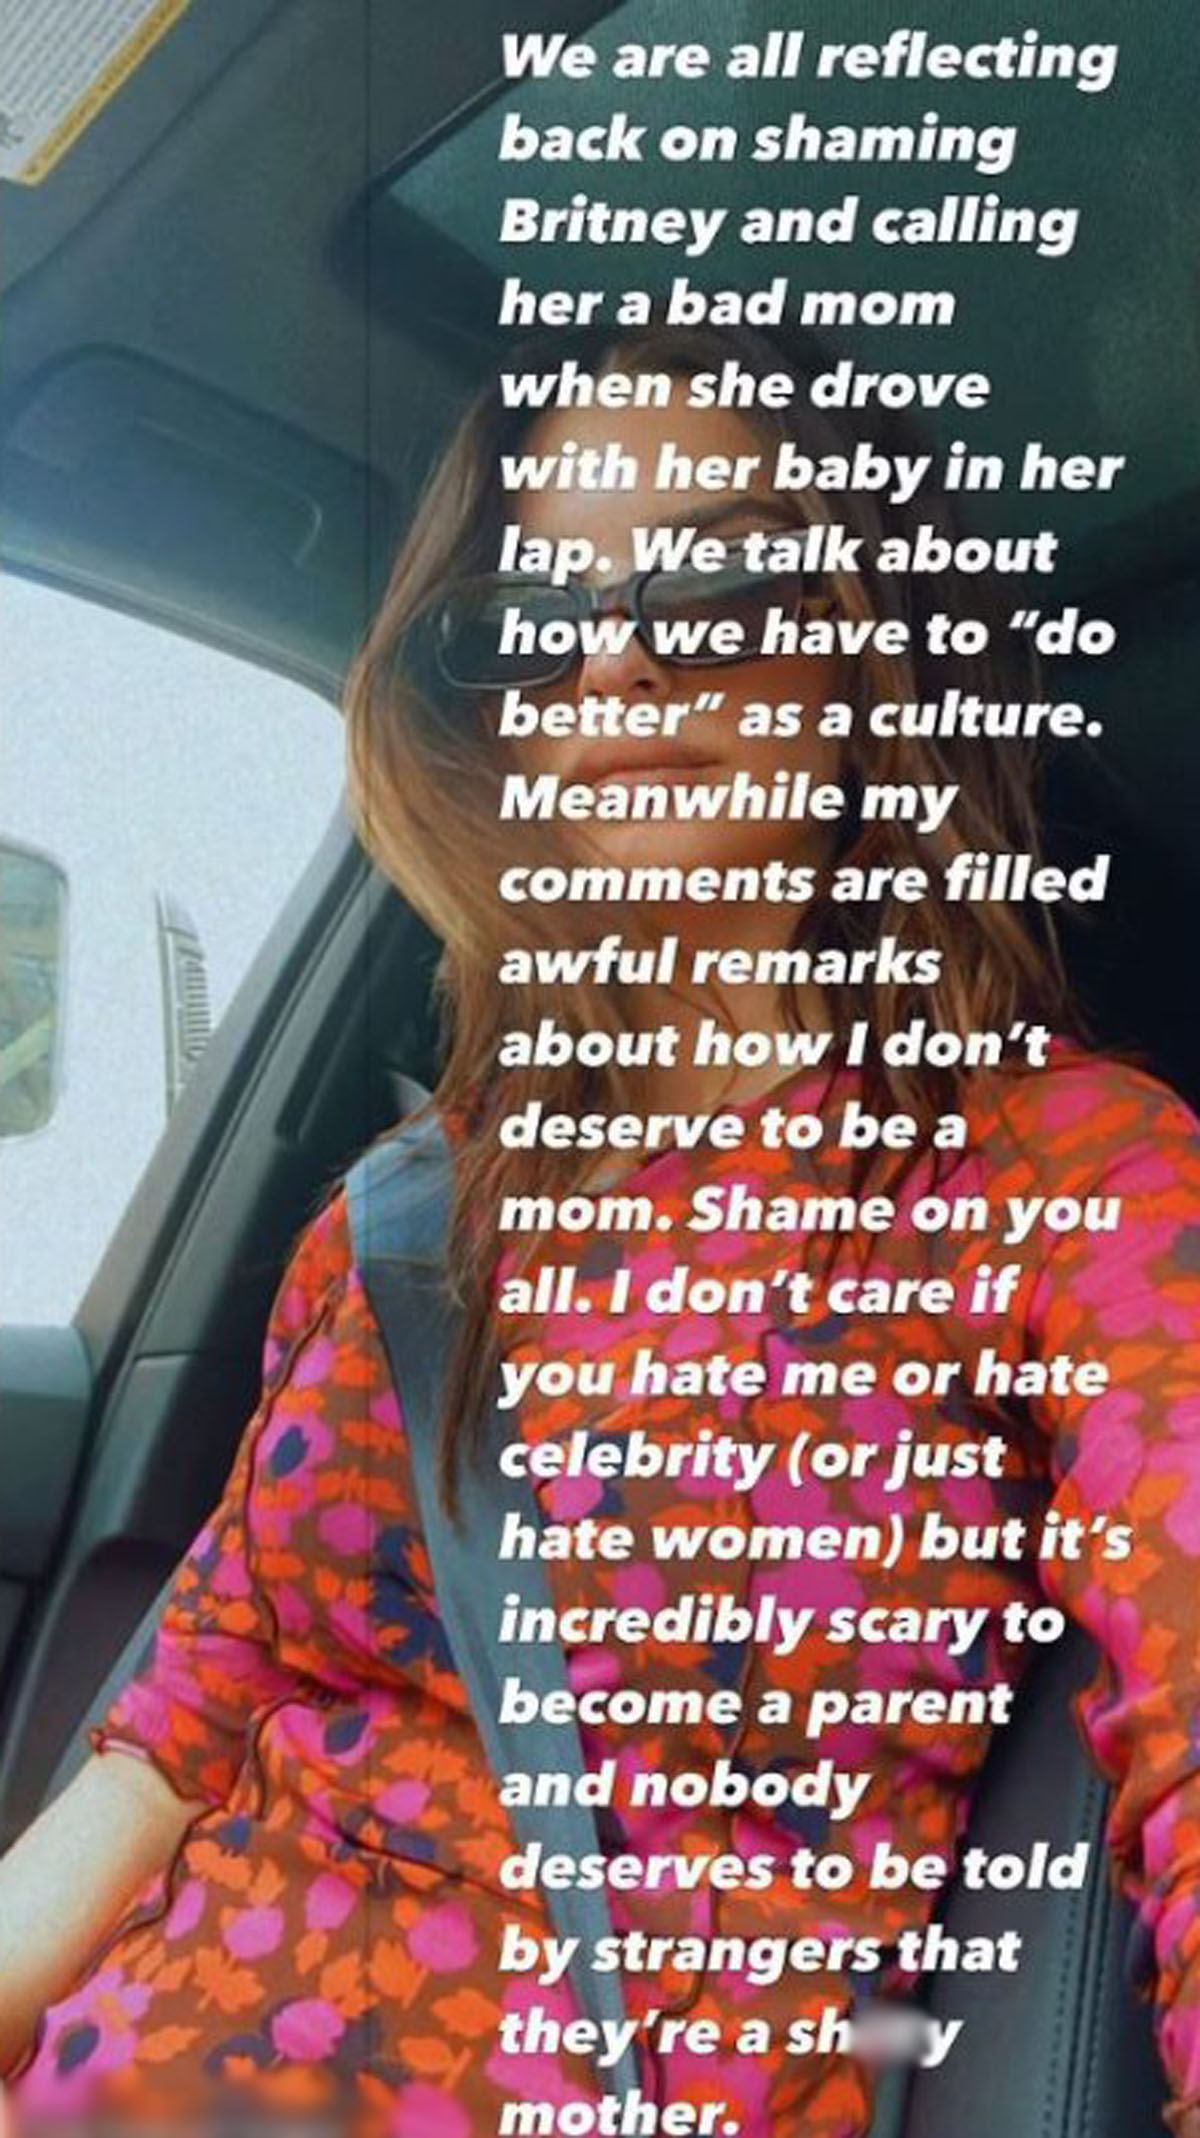 Emily Ratajkowski Slams Trolls For Calling Her A ’S**tty Mom’ & Compares Her Situation To Britney Spears!